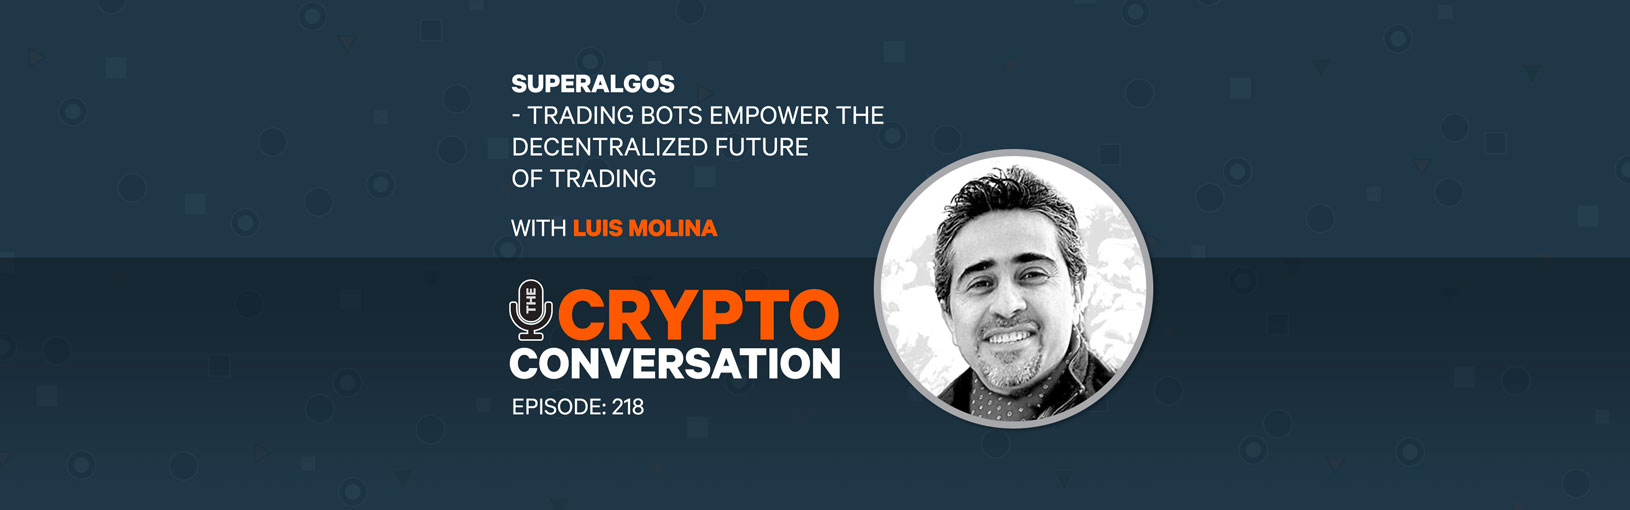 Superalgos – Trading bots empower the decentralized future of trading